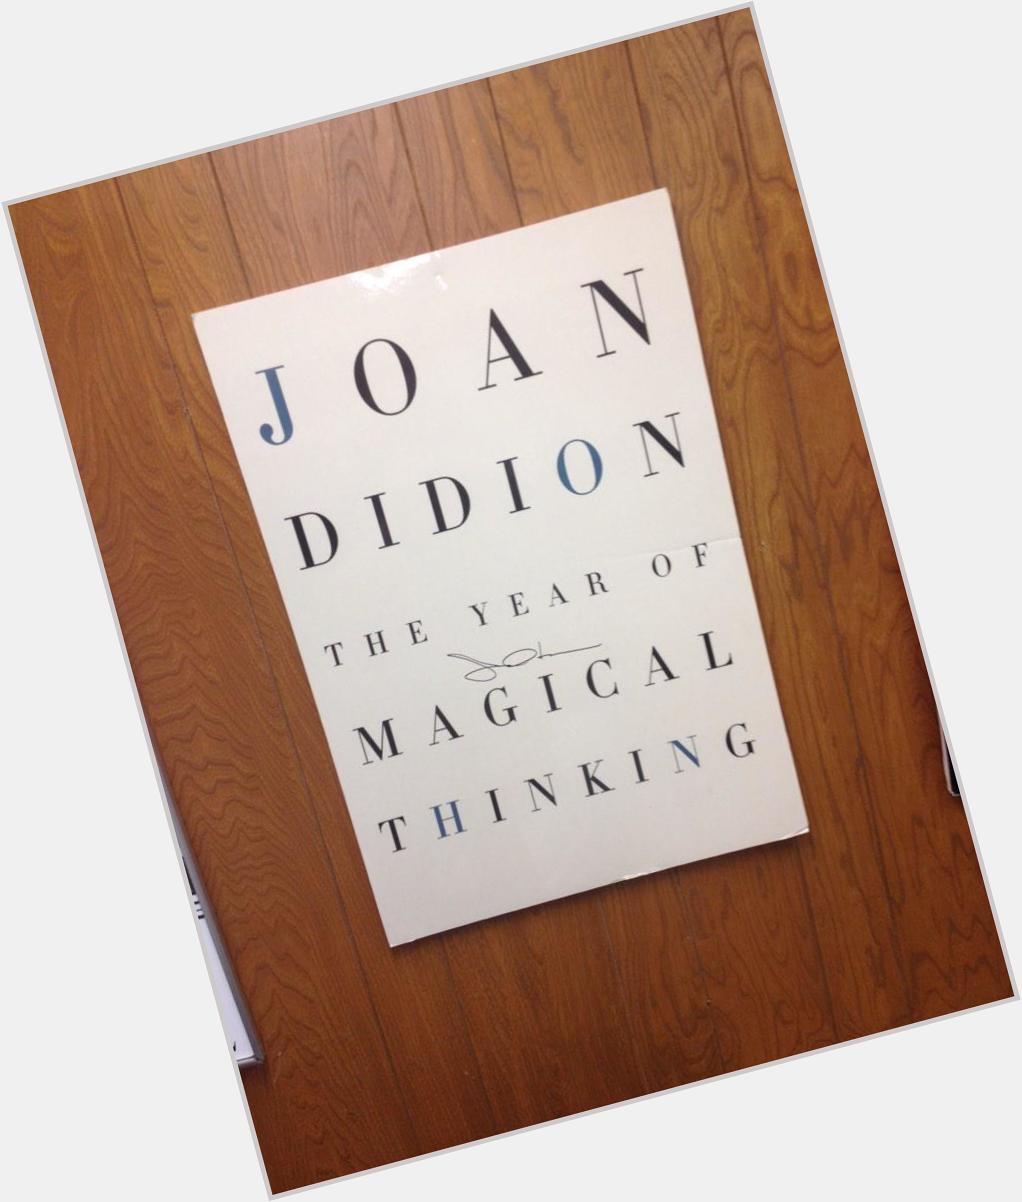 Happy birthday to our dear friend Joan Didion! This poster in the classroom in from her Writers Studio visit. 